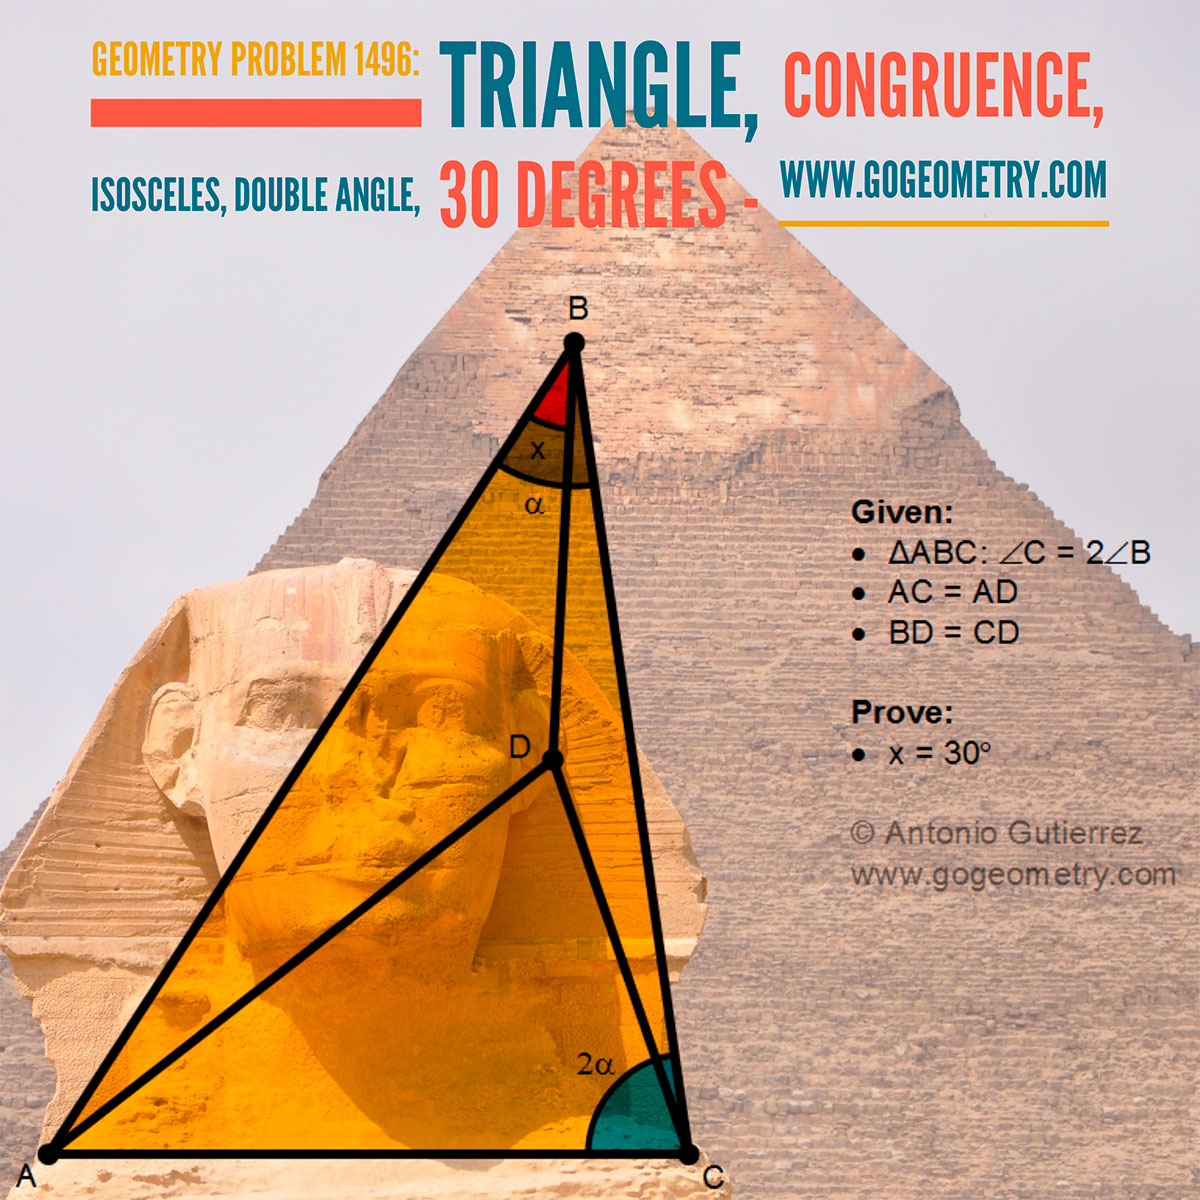 Geometry Problem 1496: Triangle, Congruence, Isosceles, Double Angle, 30 Degrees, Sphinx and the Great Pyramid in the background